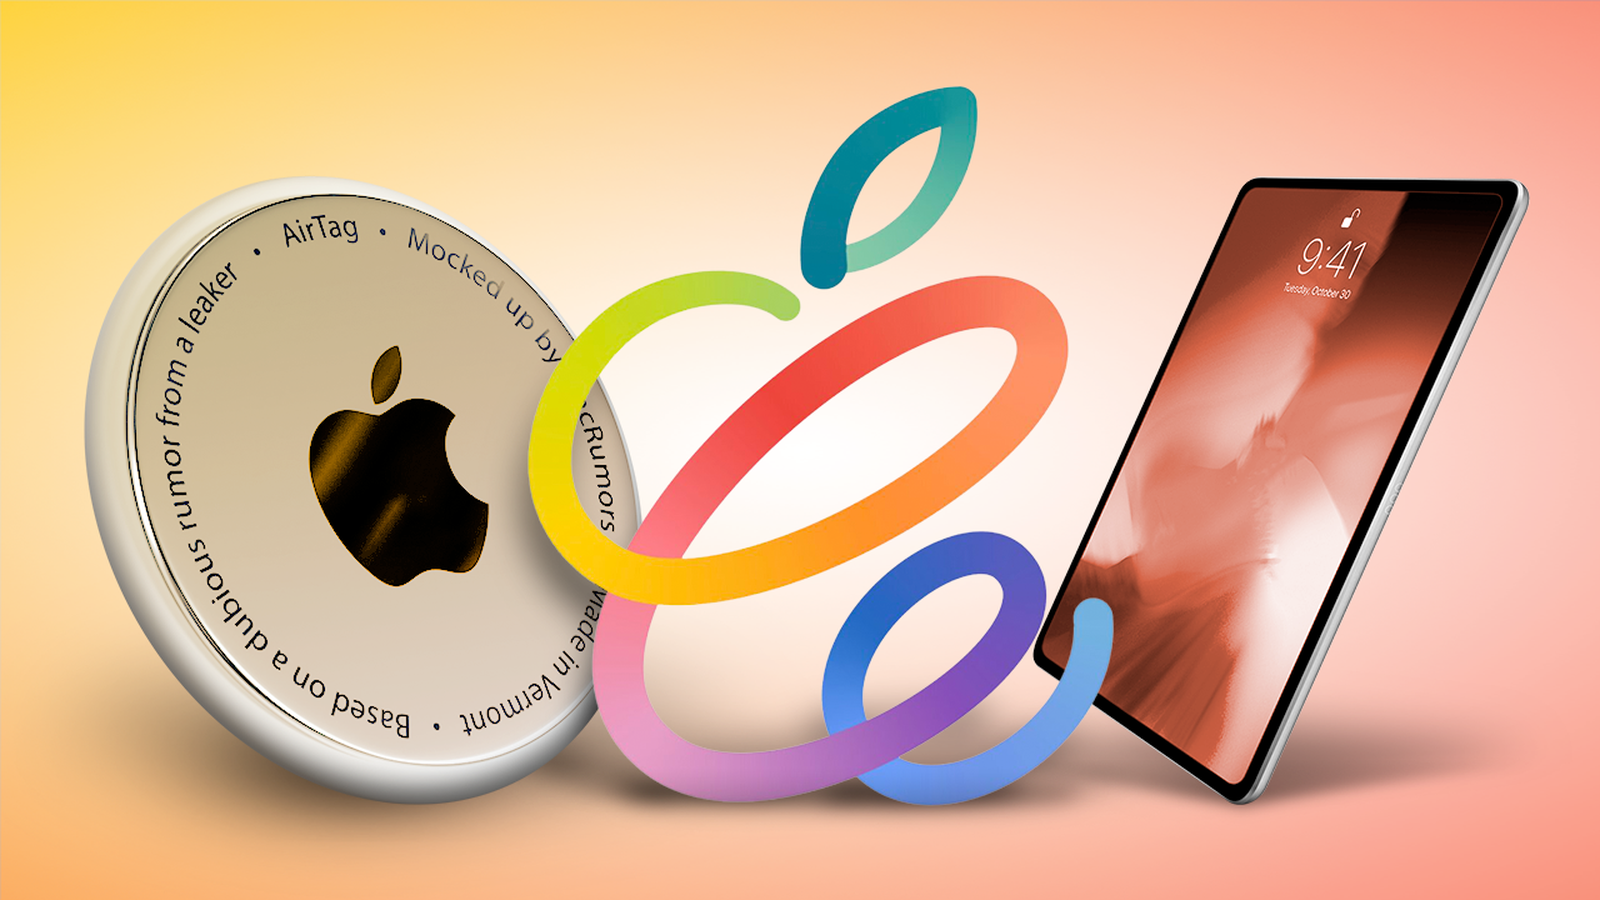 What To Expect From Apple S April Event New Ipads Airtags And More Macrumors